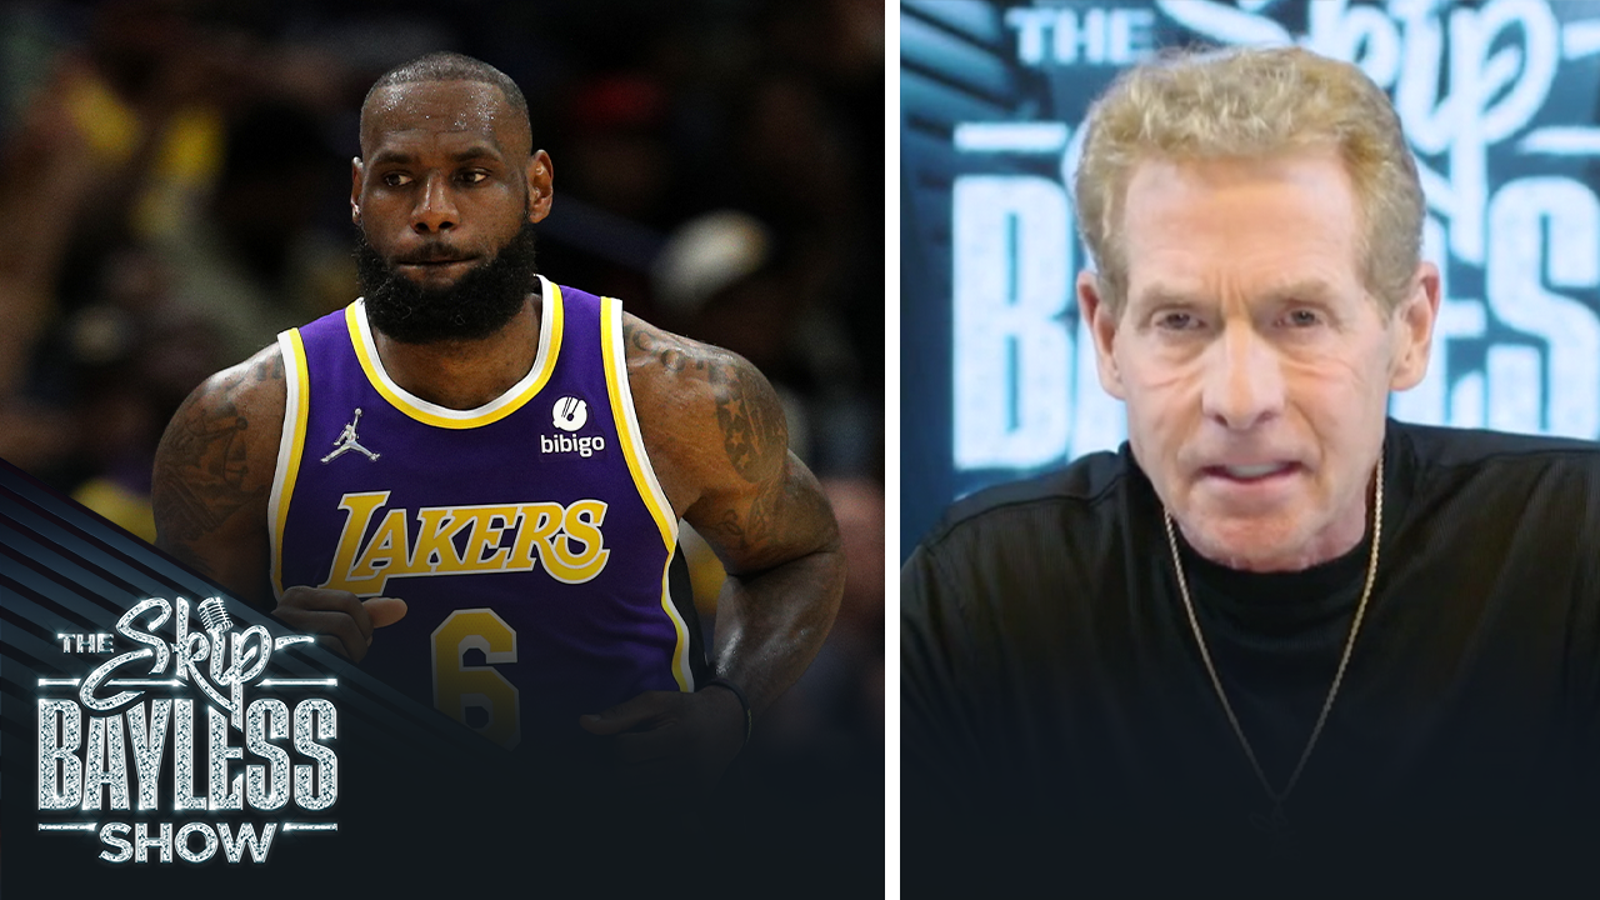 Does LeBron's all-time ranking drop if Lakers miss playoffs?